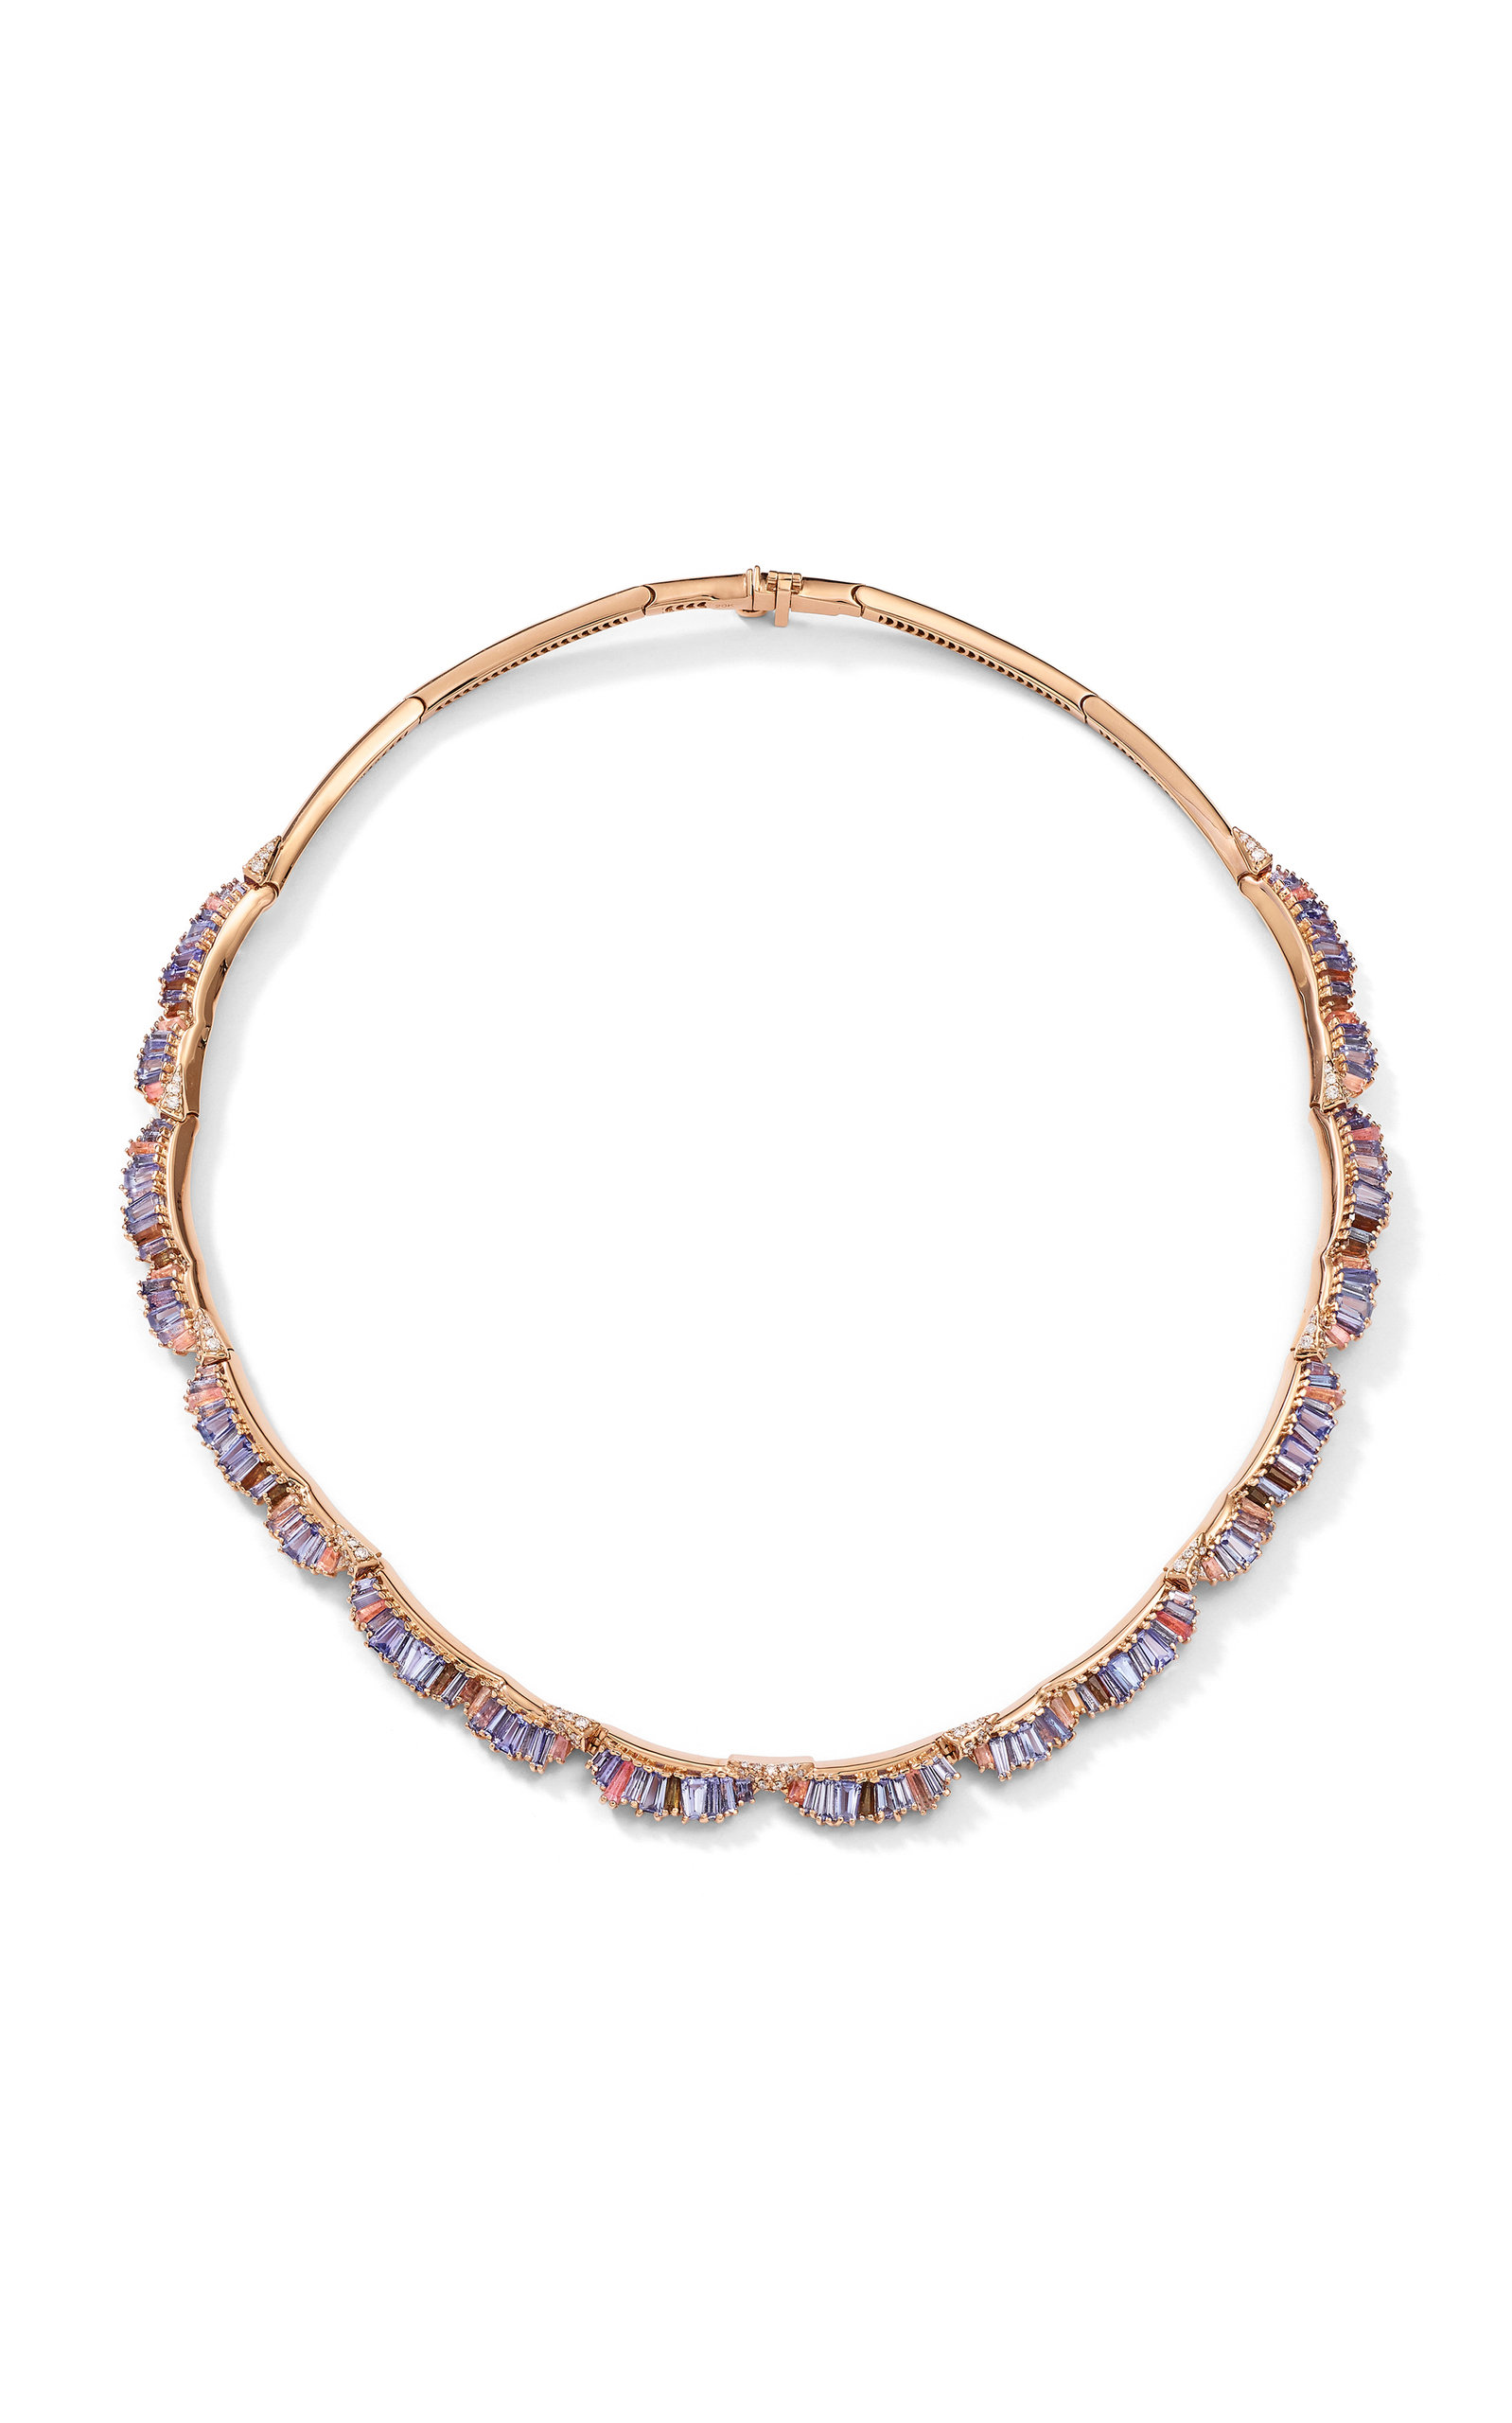 NAK ARMSTRONG WOMEN'S 20K ROSE GOLD RUCHED RIVIERE NECKLACE